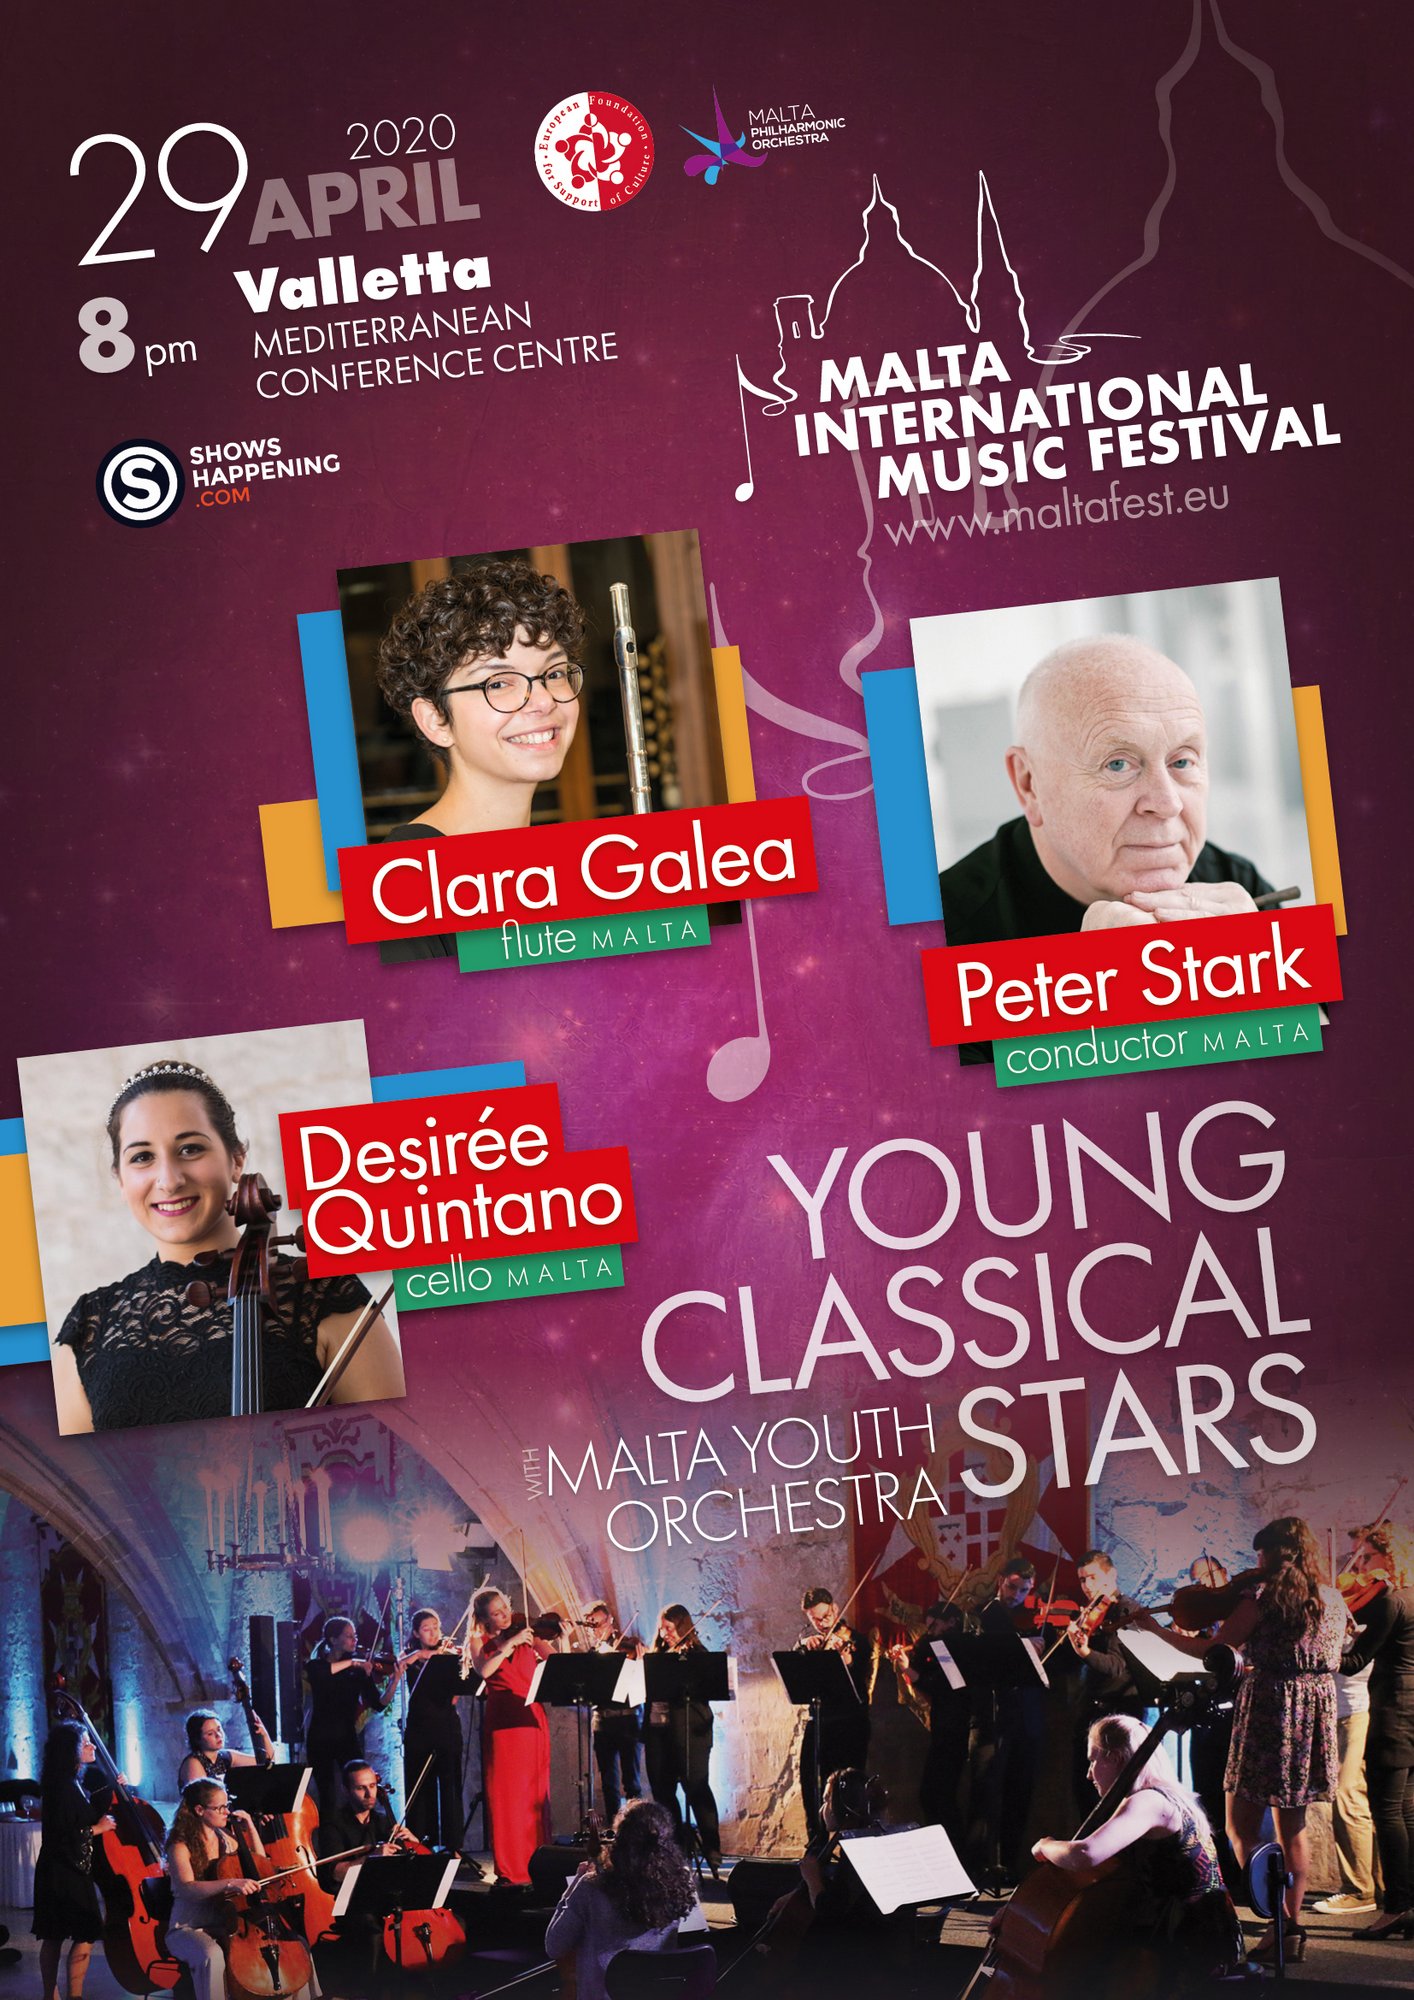 Young Classical Stars with Malta Youth Orchestra poster